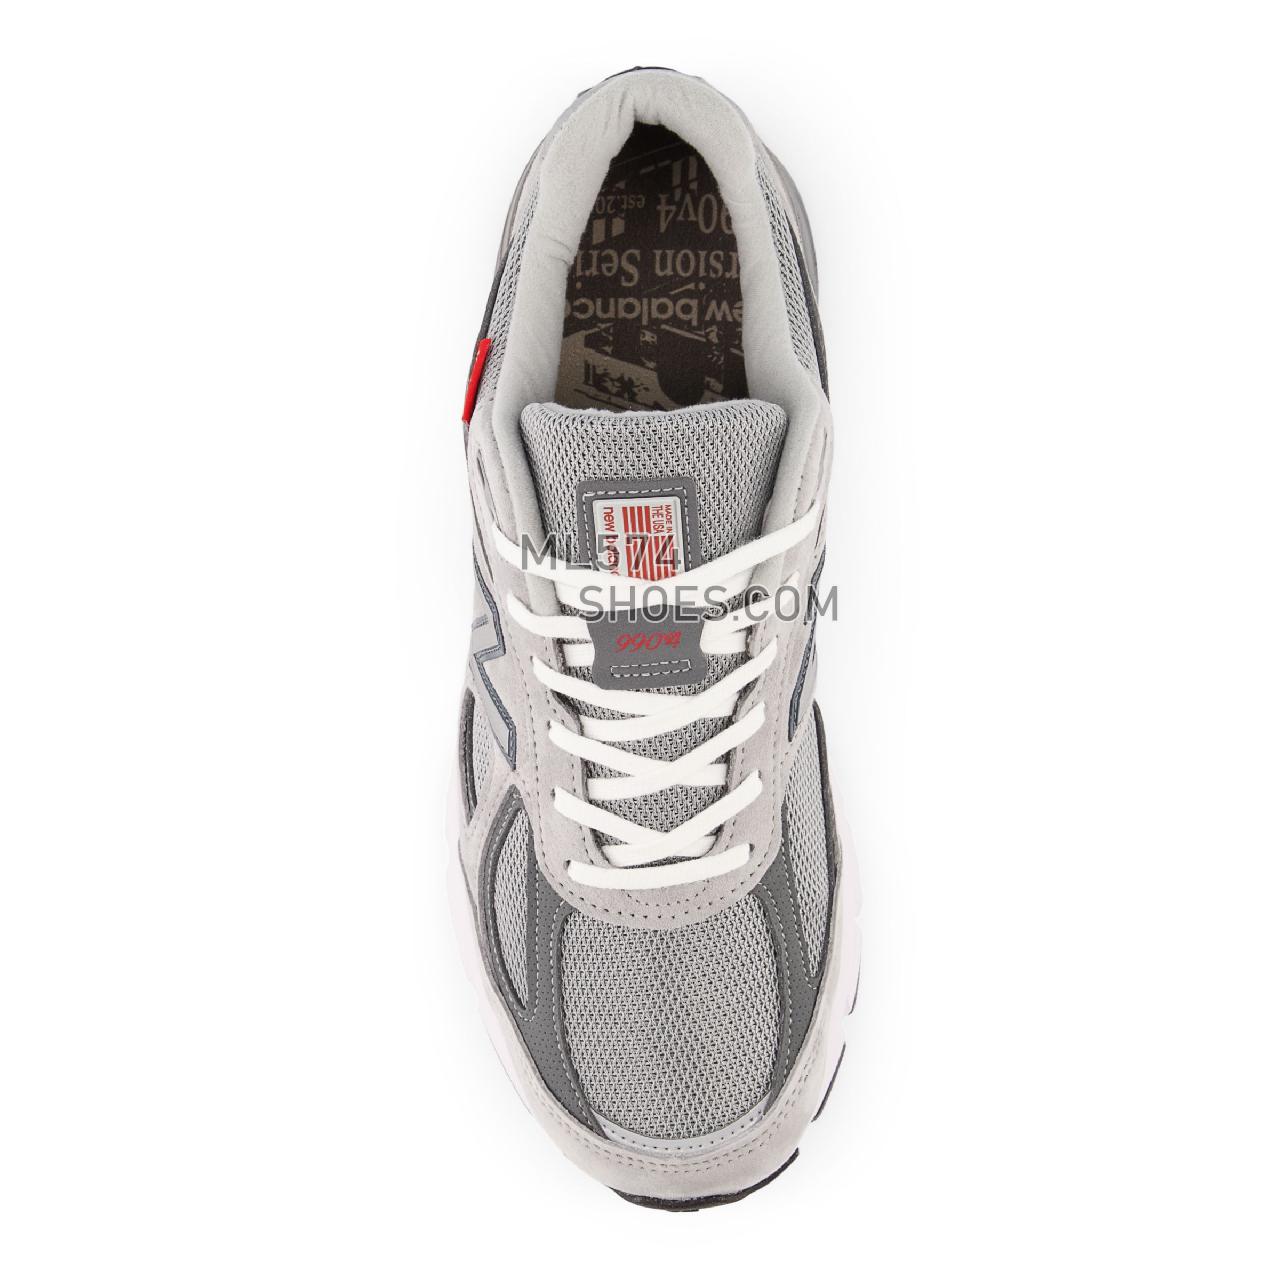 New Balance Made in US 990v4 - Unisex Men's Women's Neutral Running - Grey with Red - M990VS4